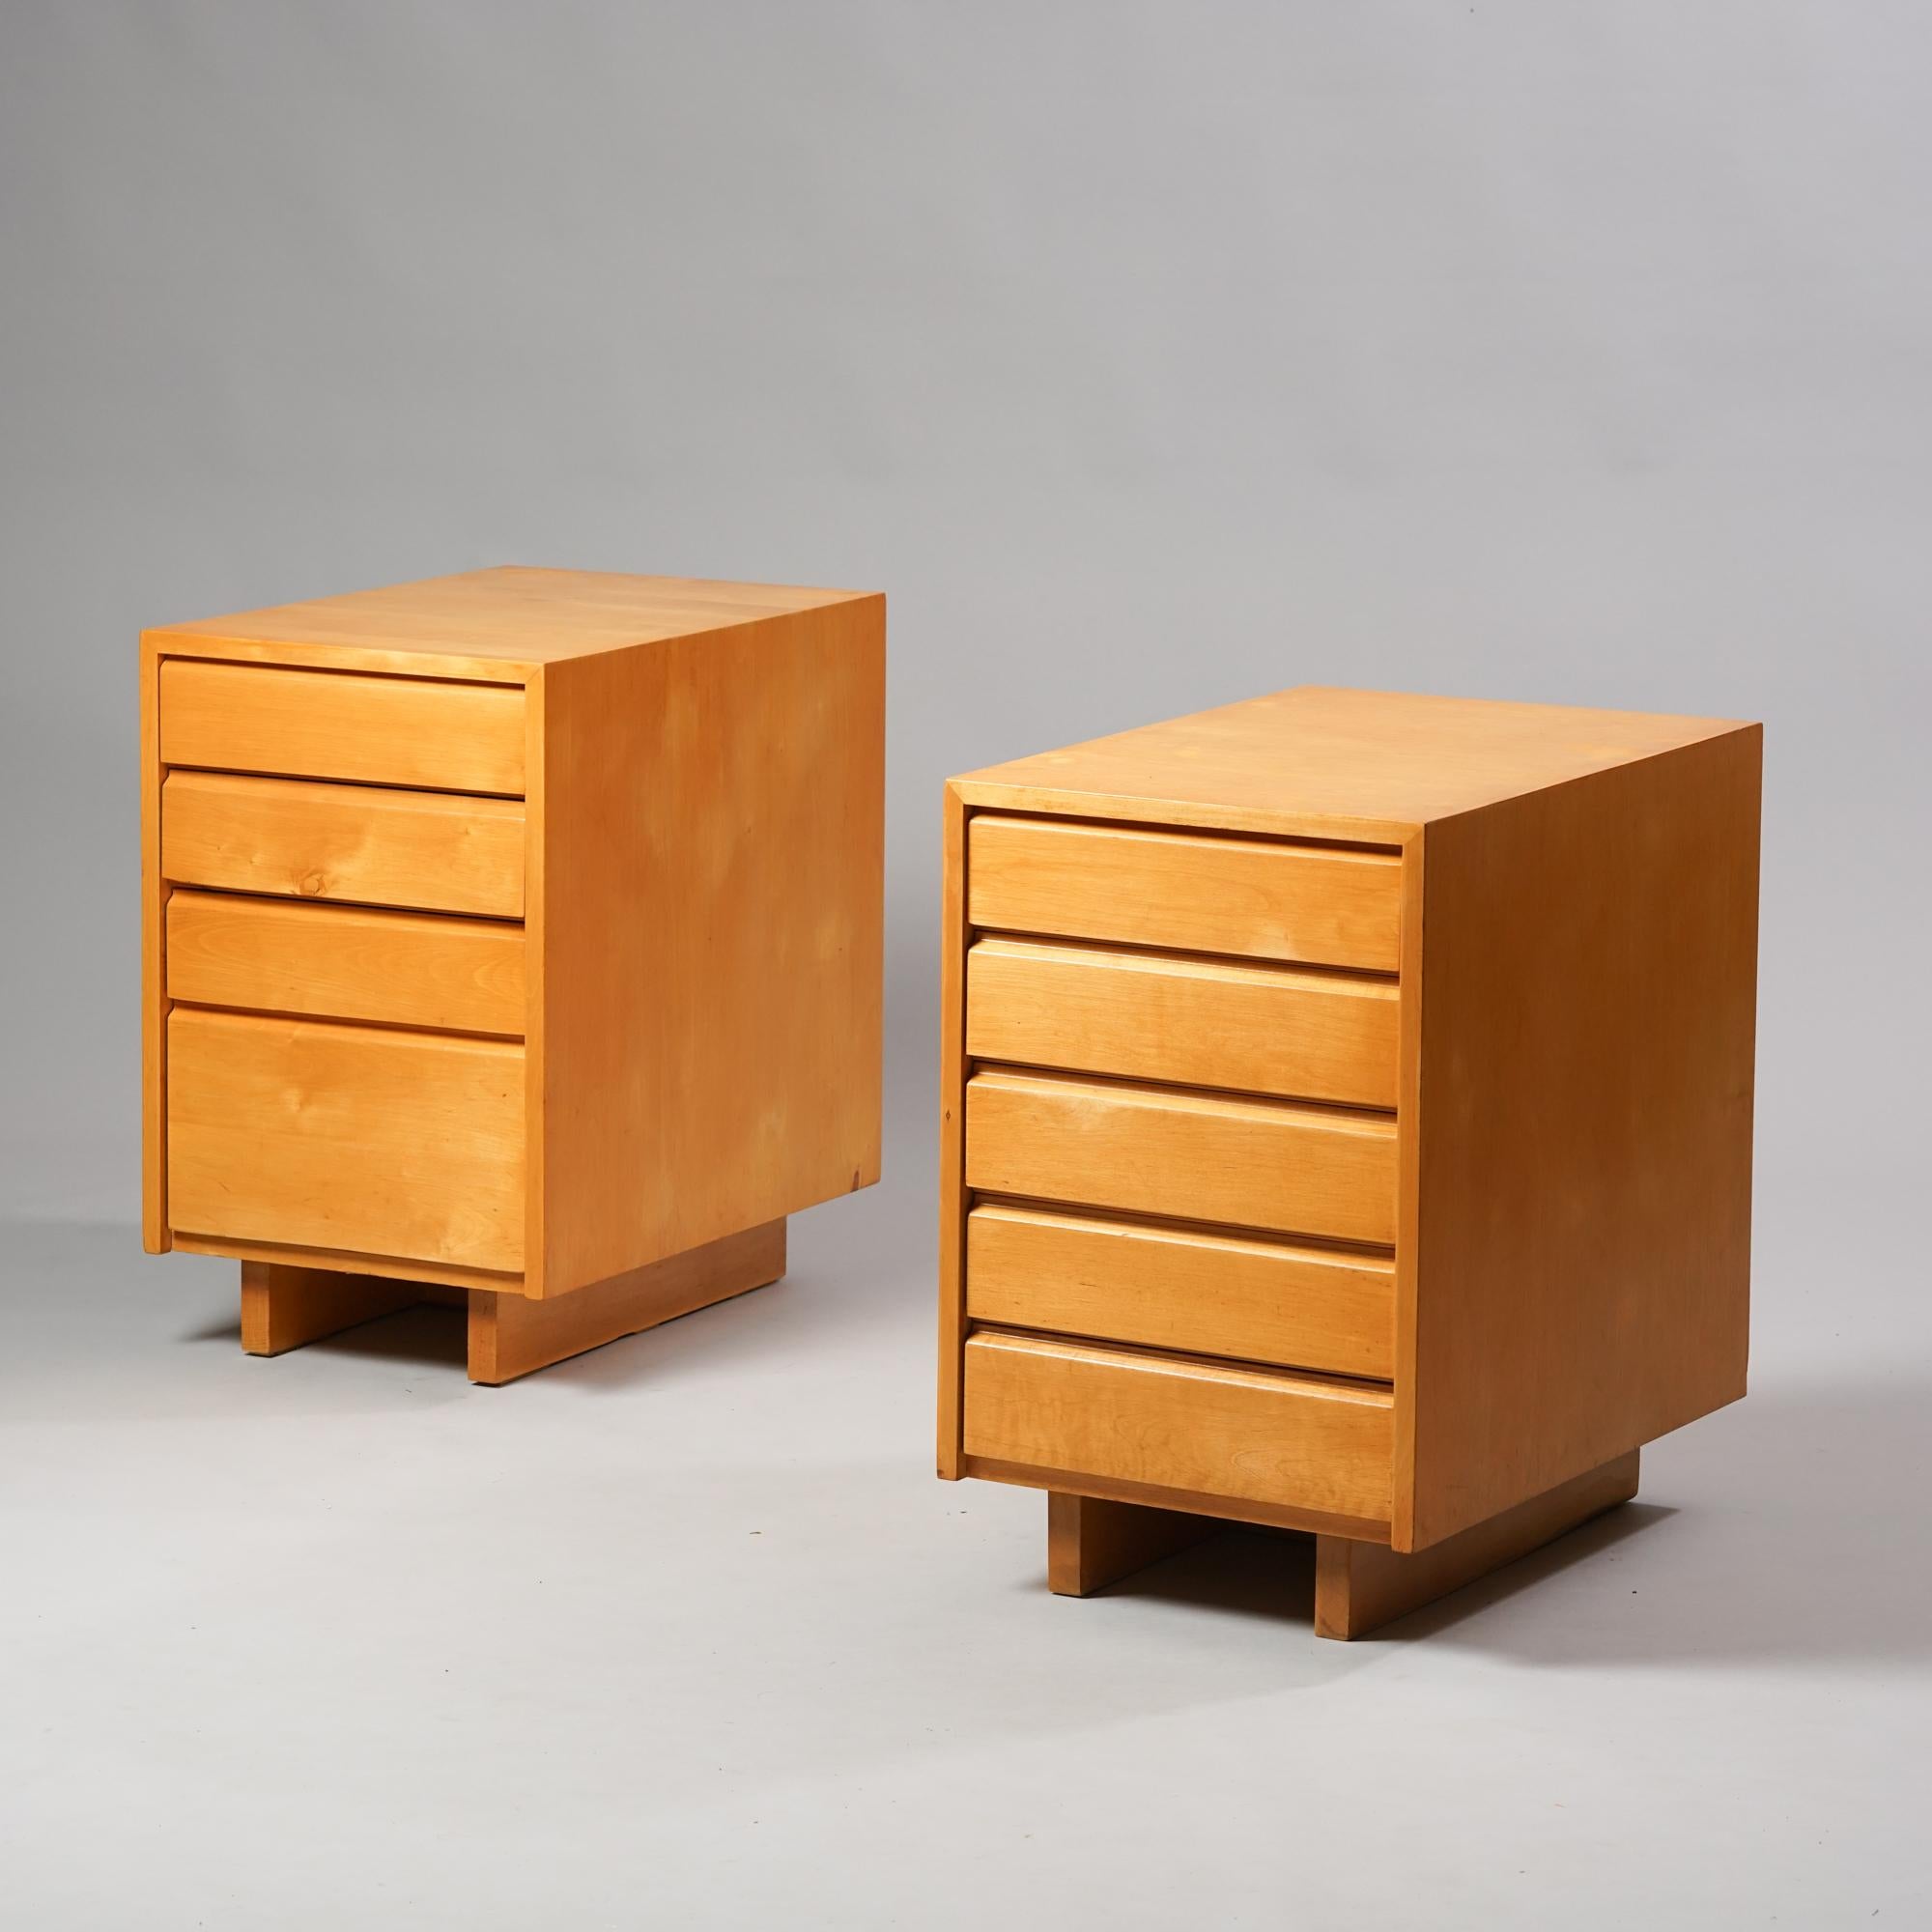 A rare set of drawers designed by Ilmari Tapiovaara. Manufactured by Keravan Puuteollisuus in mid 1900s. The drawers are made of birch. Sold together. Minor wear consistent with age and use.

The main element in Tapiovaara's design was wood. He